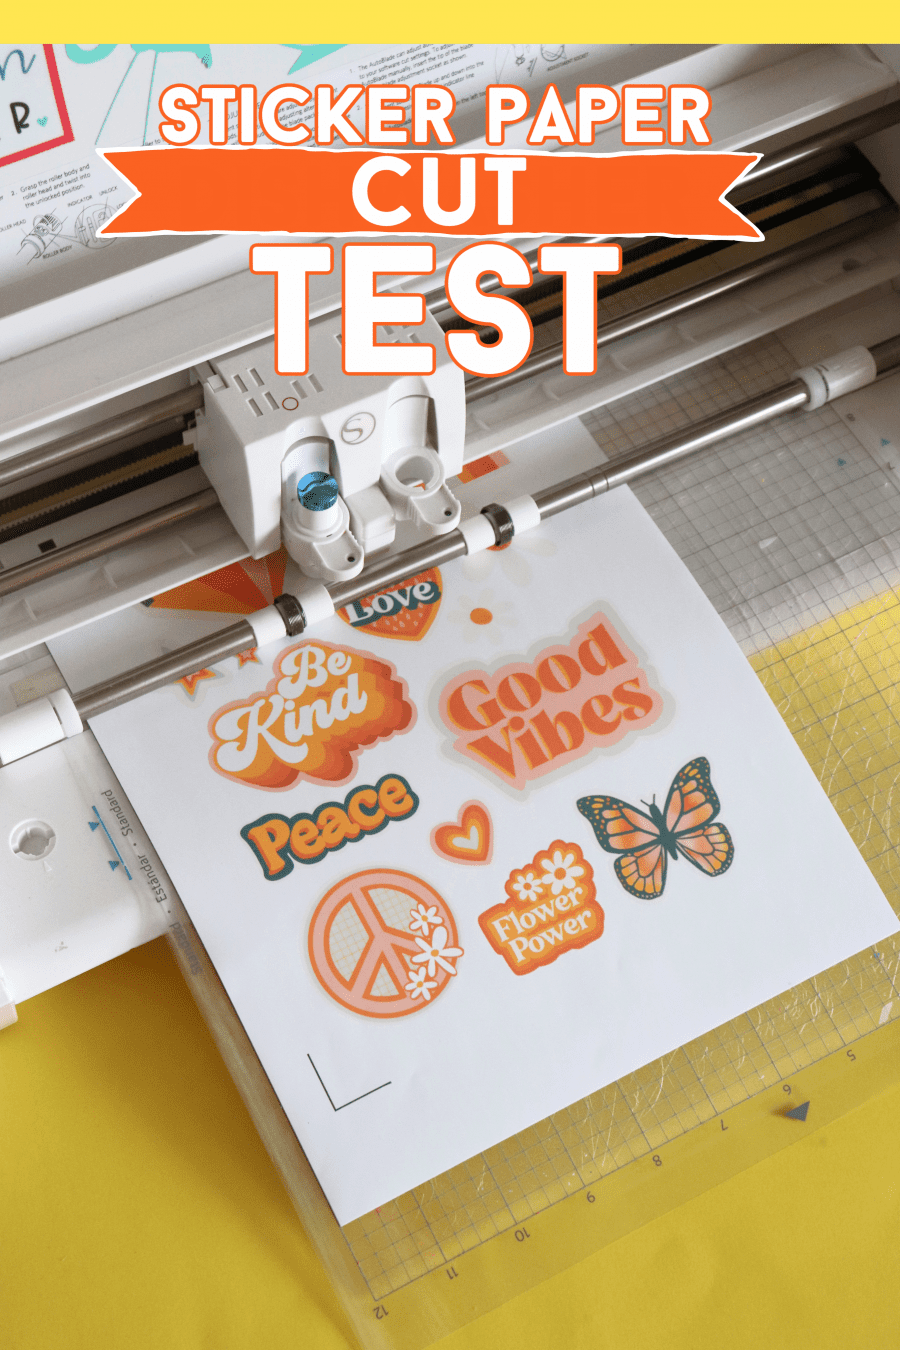 Cricut Clear Printable Sticker Paper Bundle - DIY Sticker Making Set with  Card/Paper Digital Guide, Adhesive Backed Vinyl Paper For Printing Custom